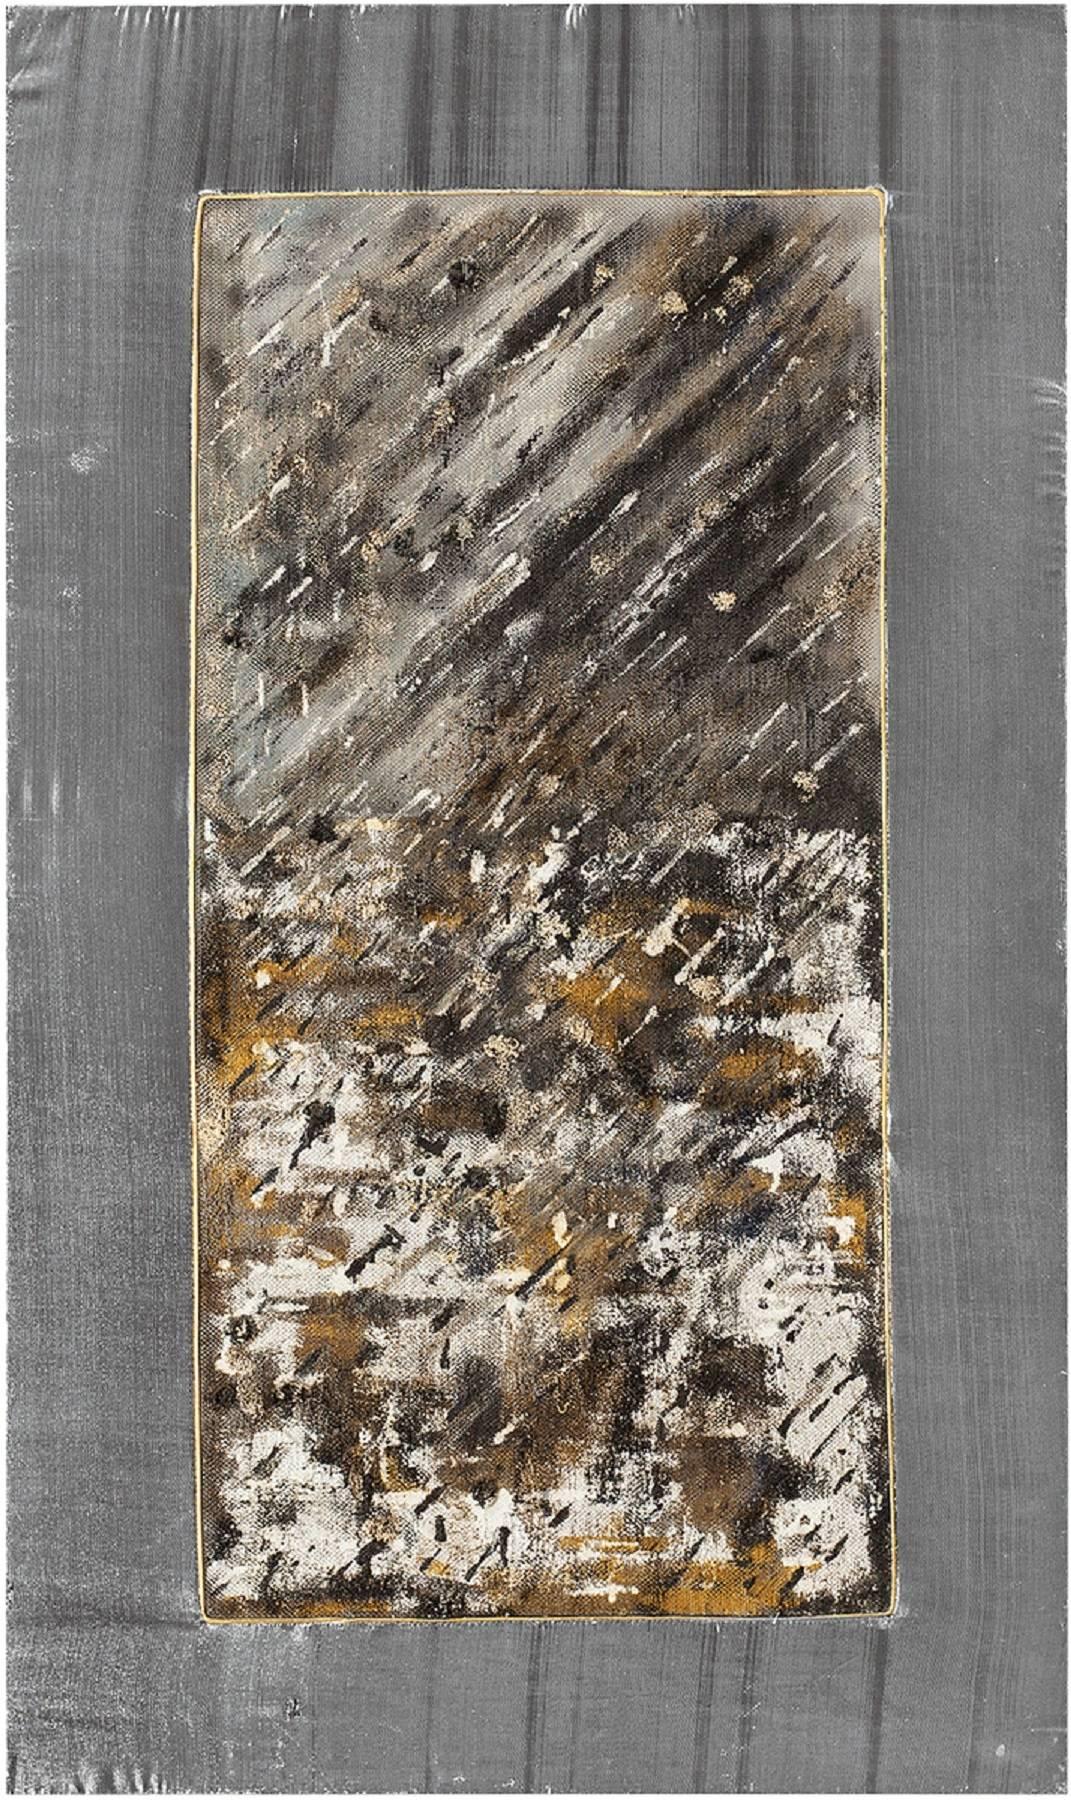 Izhar Patkin Abstract Painting - Abstract Mixed Media Painting. Oil on Silver Lame Screen Fabric